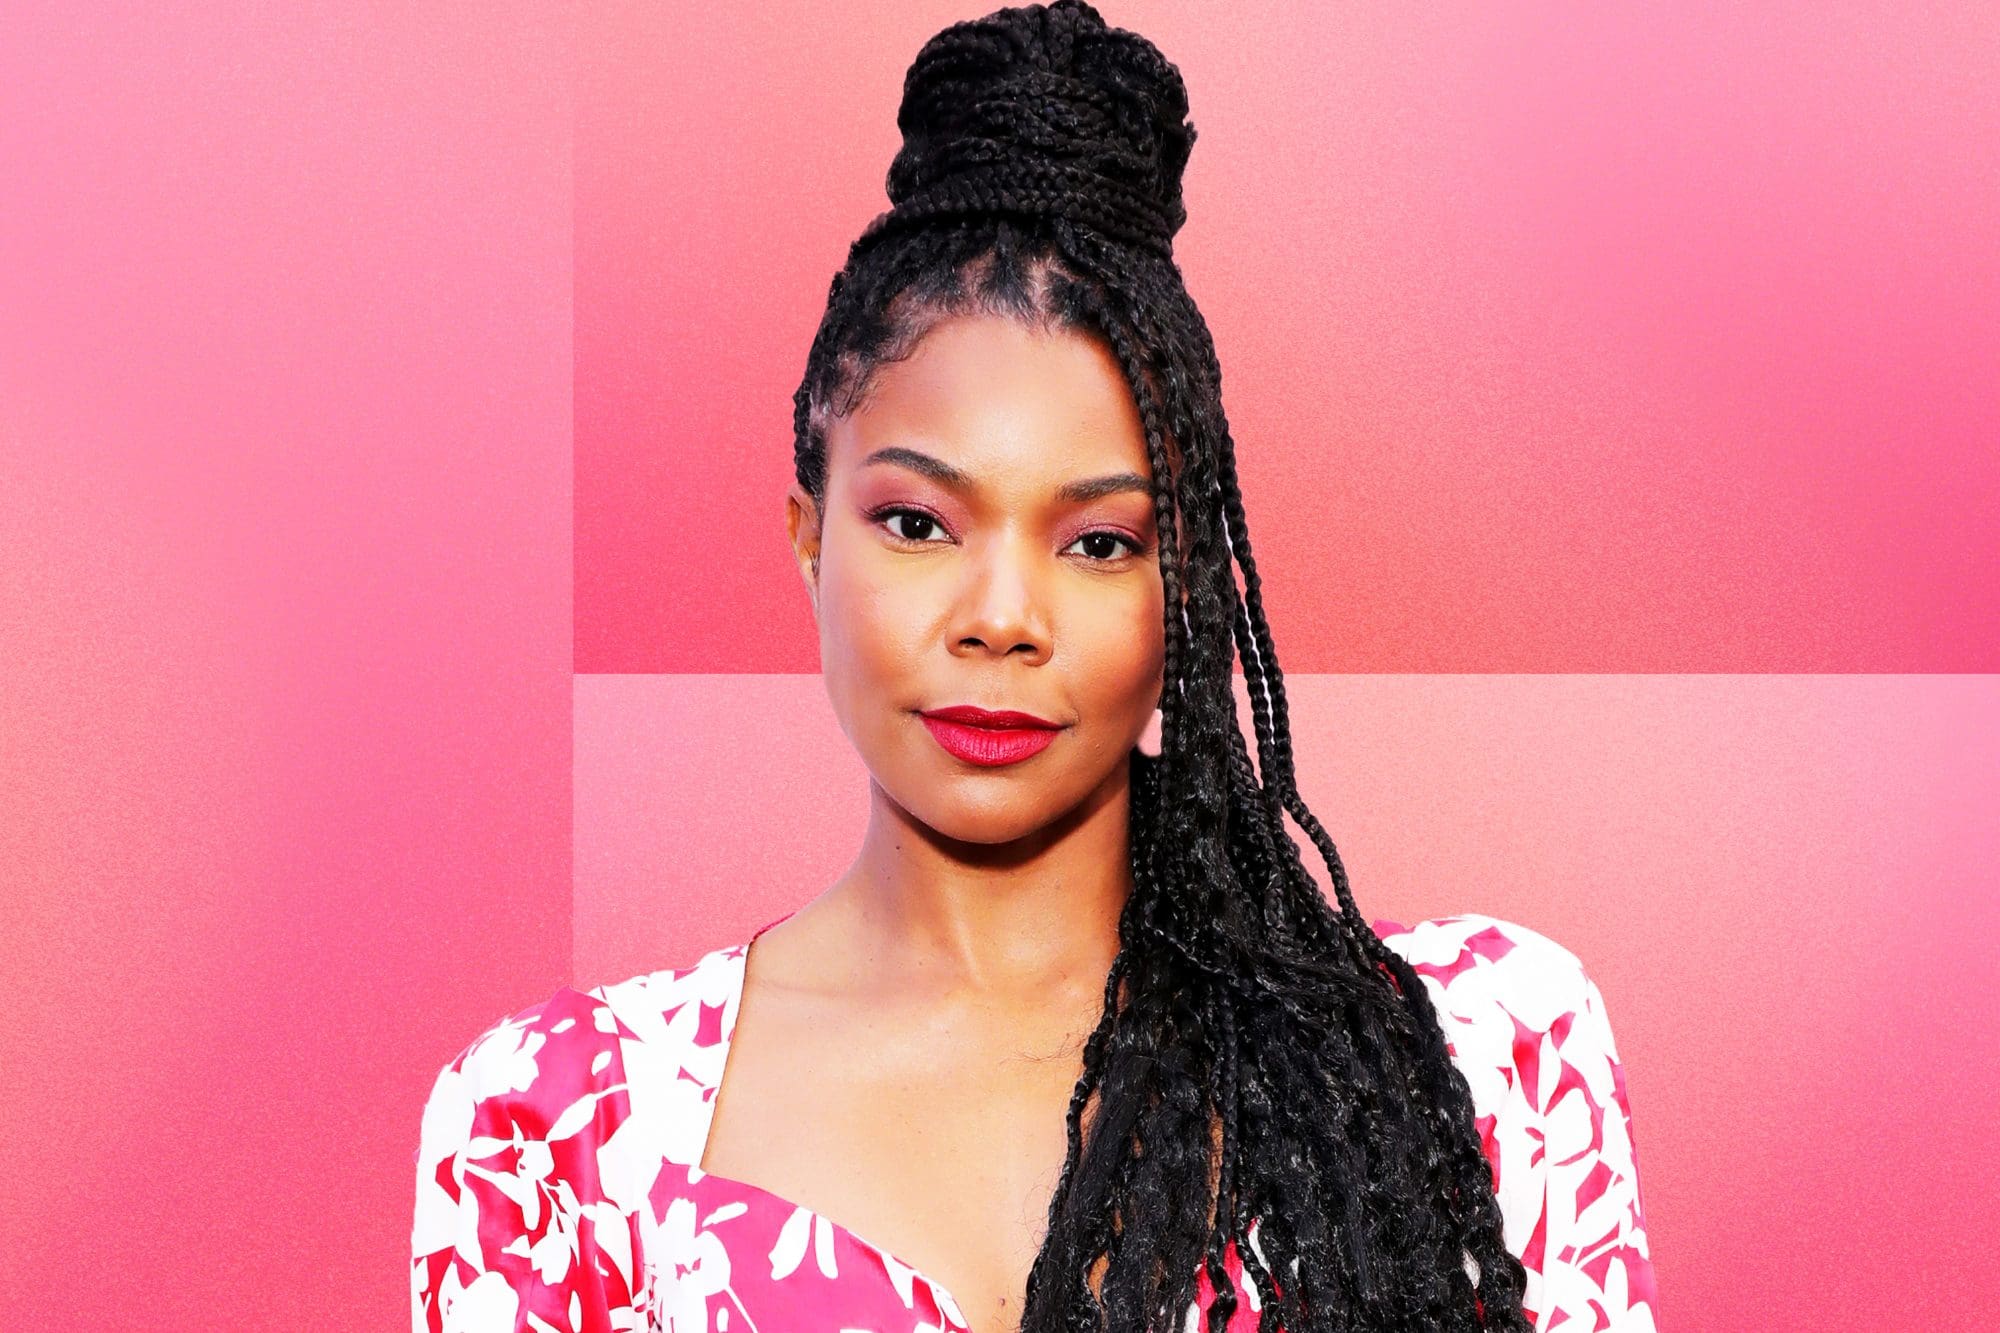 ”gabrielle-union-shares-sweet-new-pics-featuring-kaavia-james”